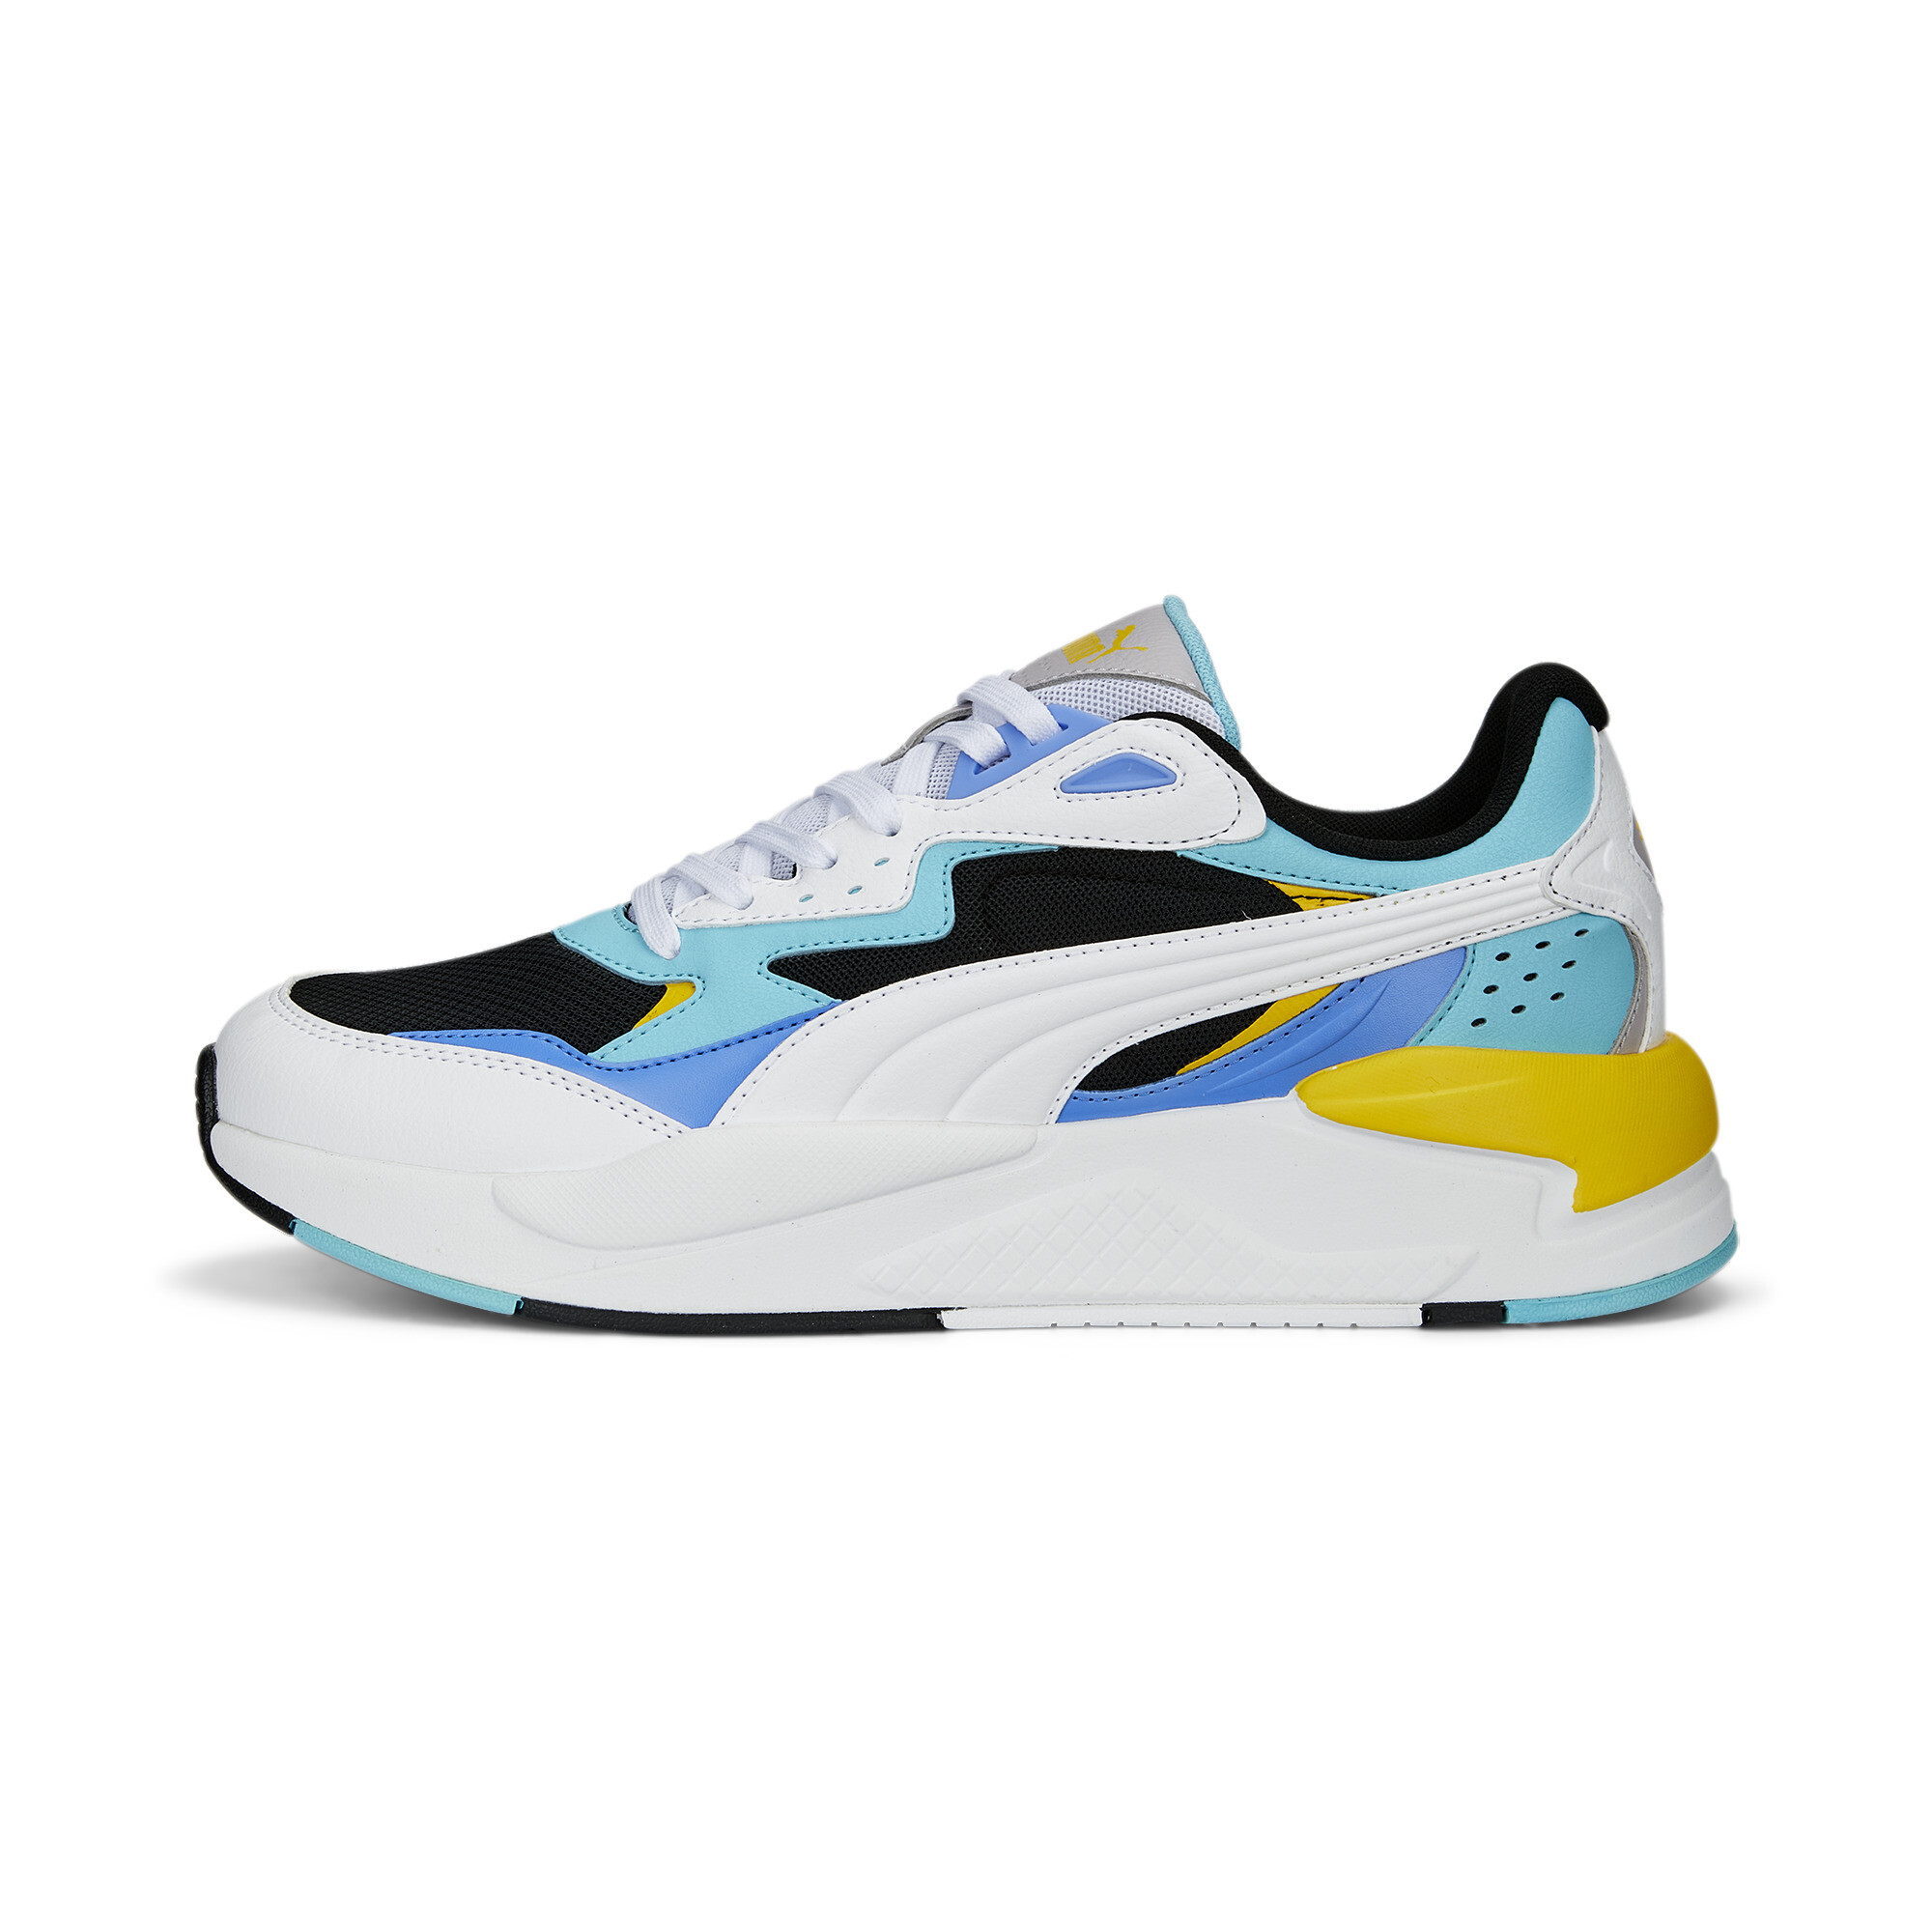 PUMA X-Ray Speed Low Trainers Sports Shoes Unisex | eBay